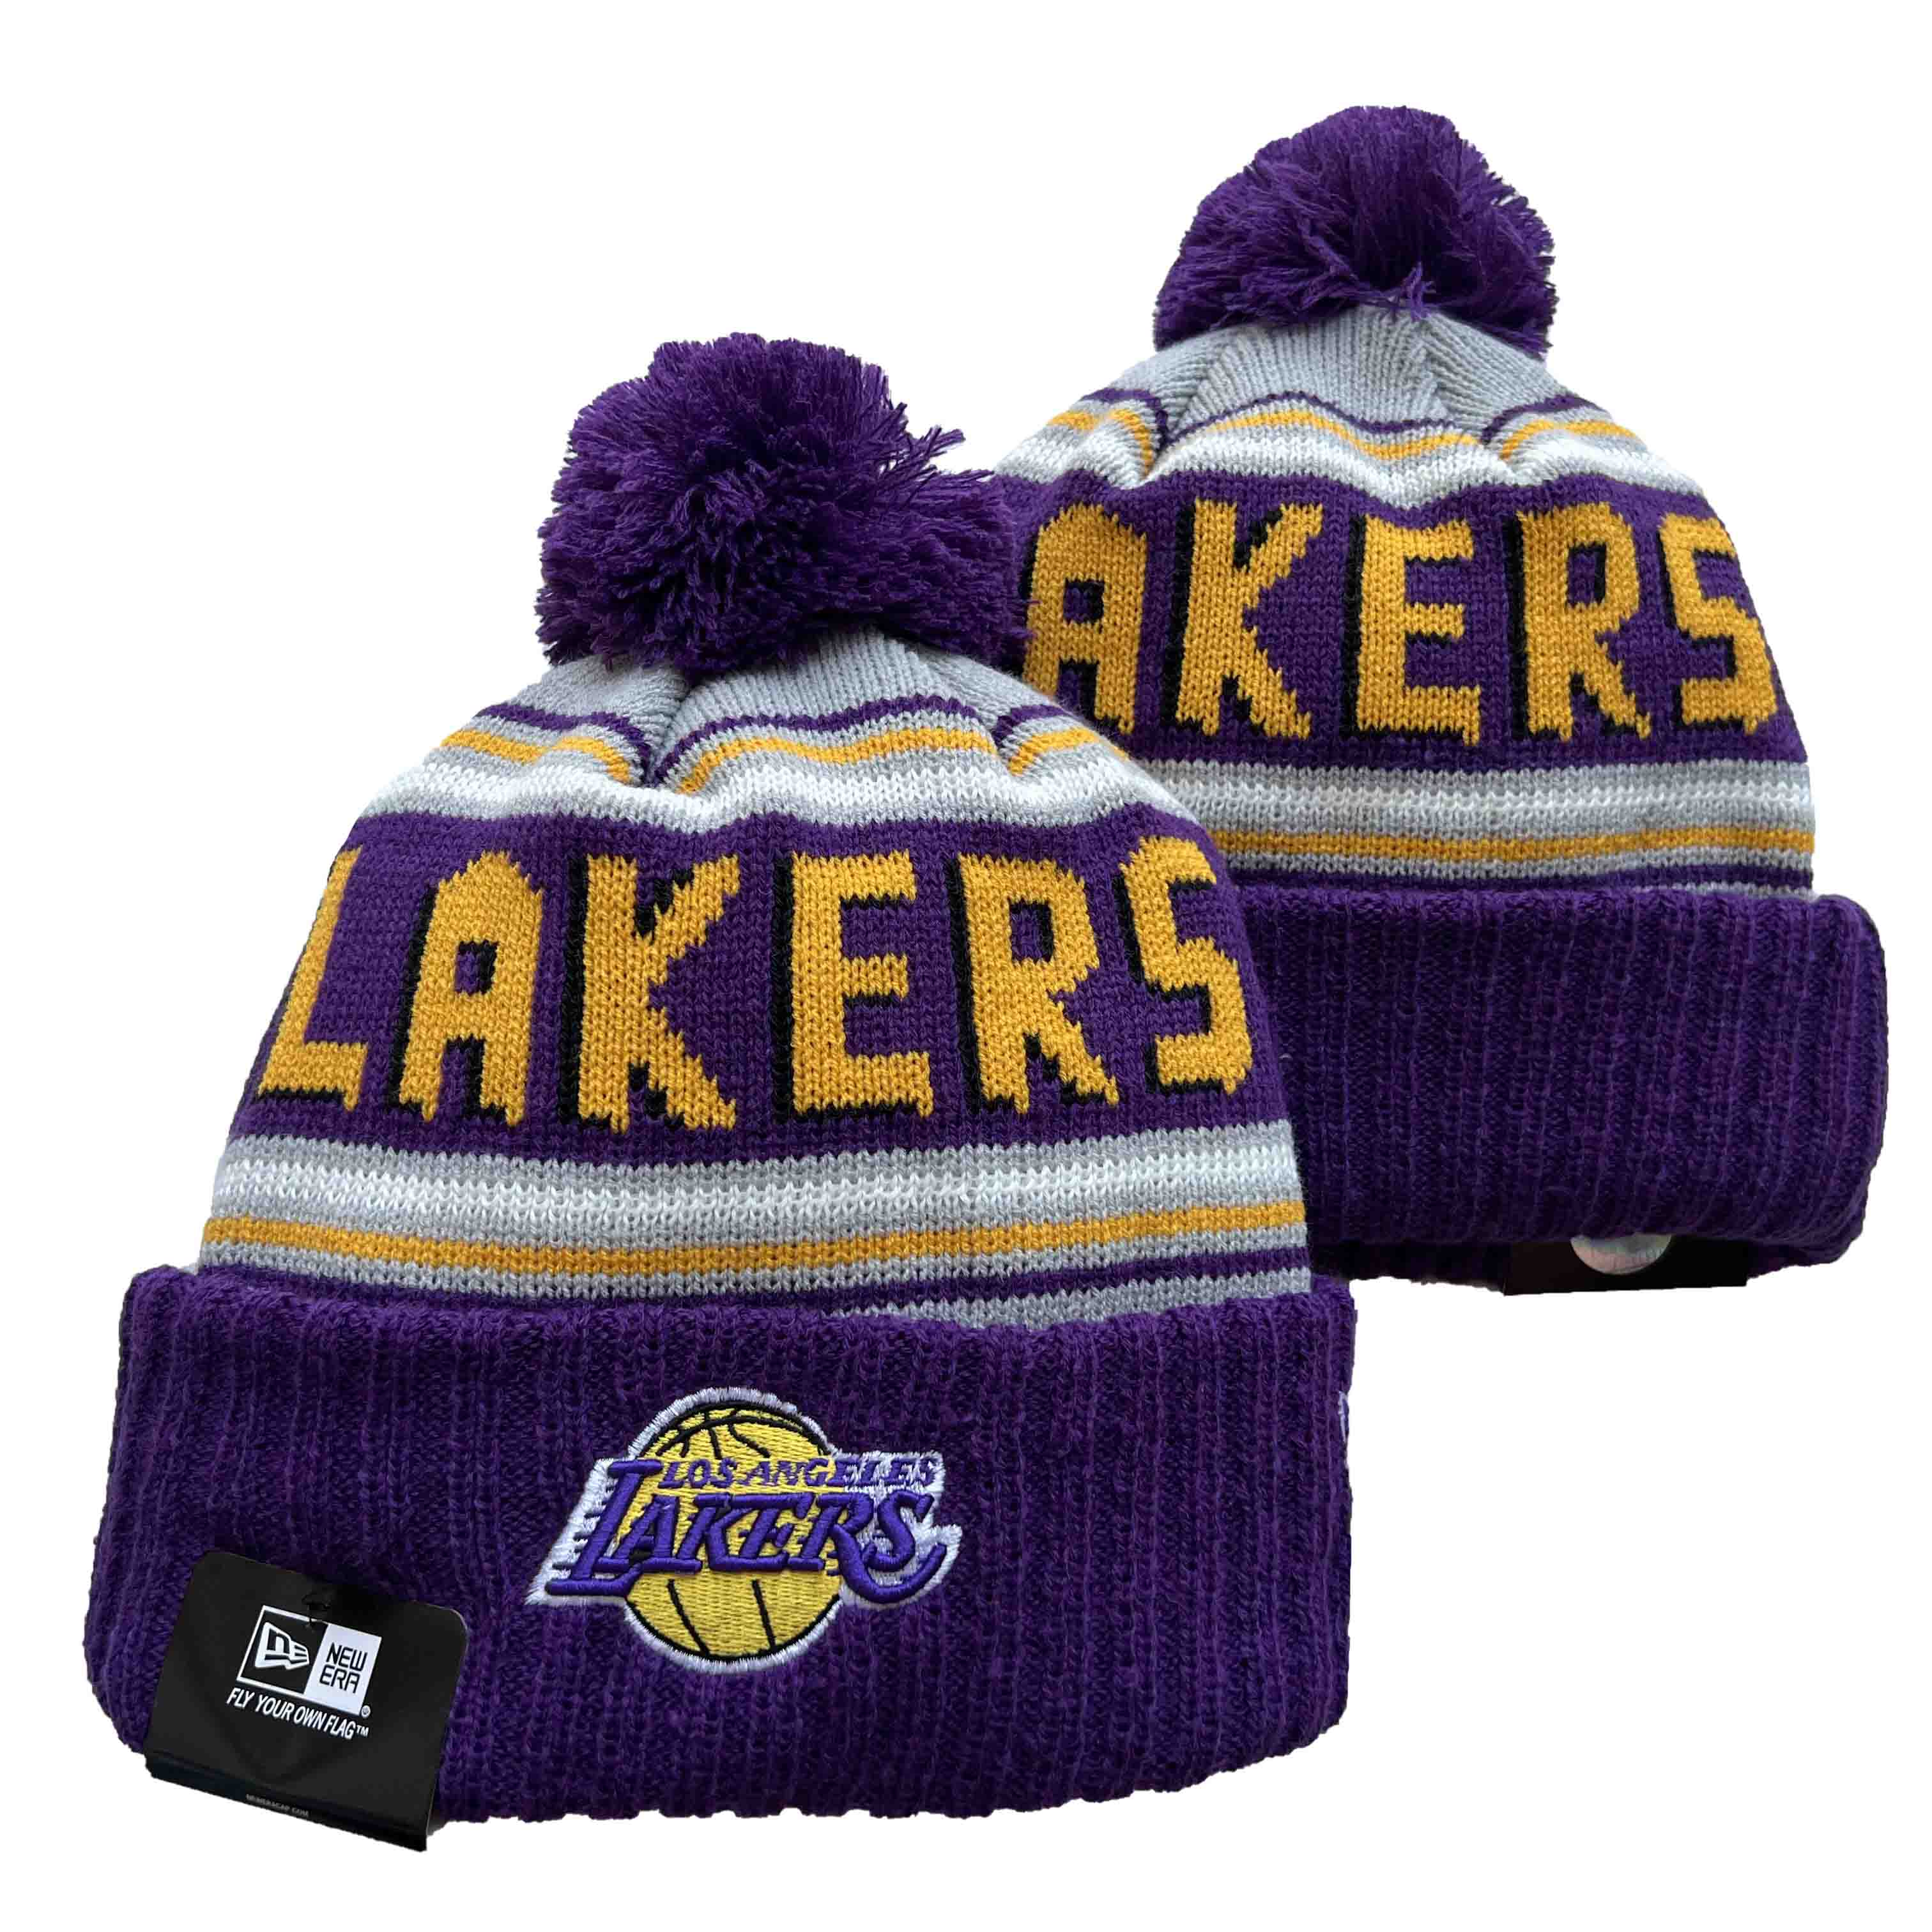 NBA Los Angeles Lakers Beanies Knit Hats-YD490